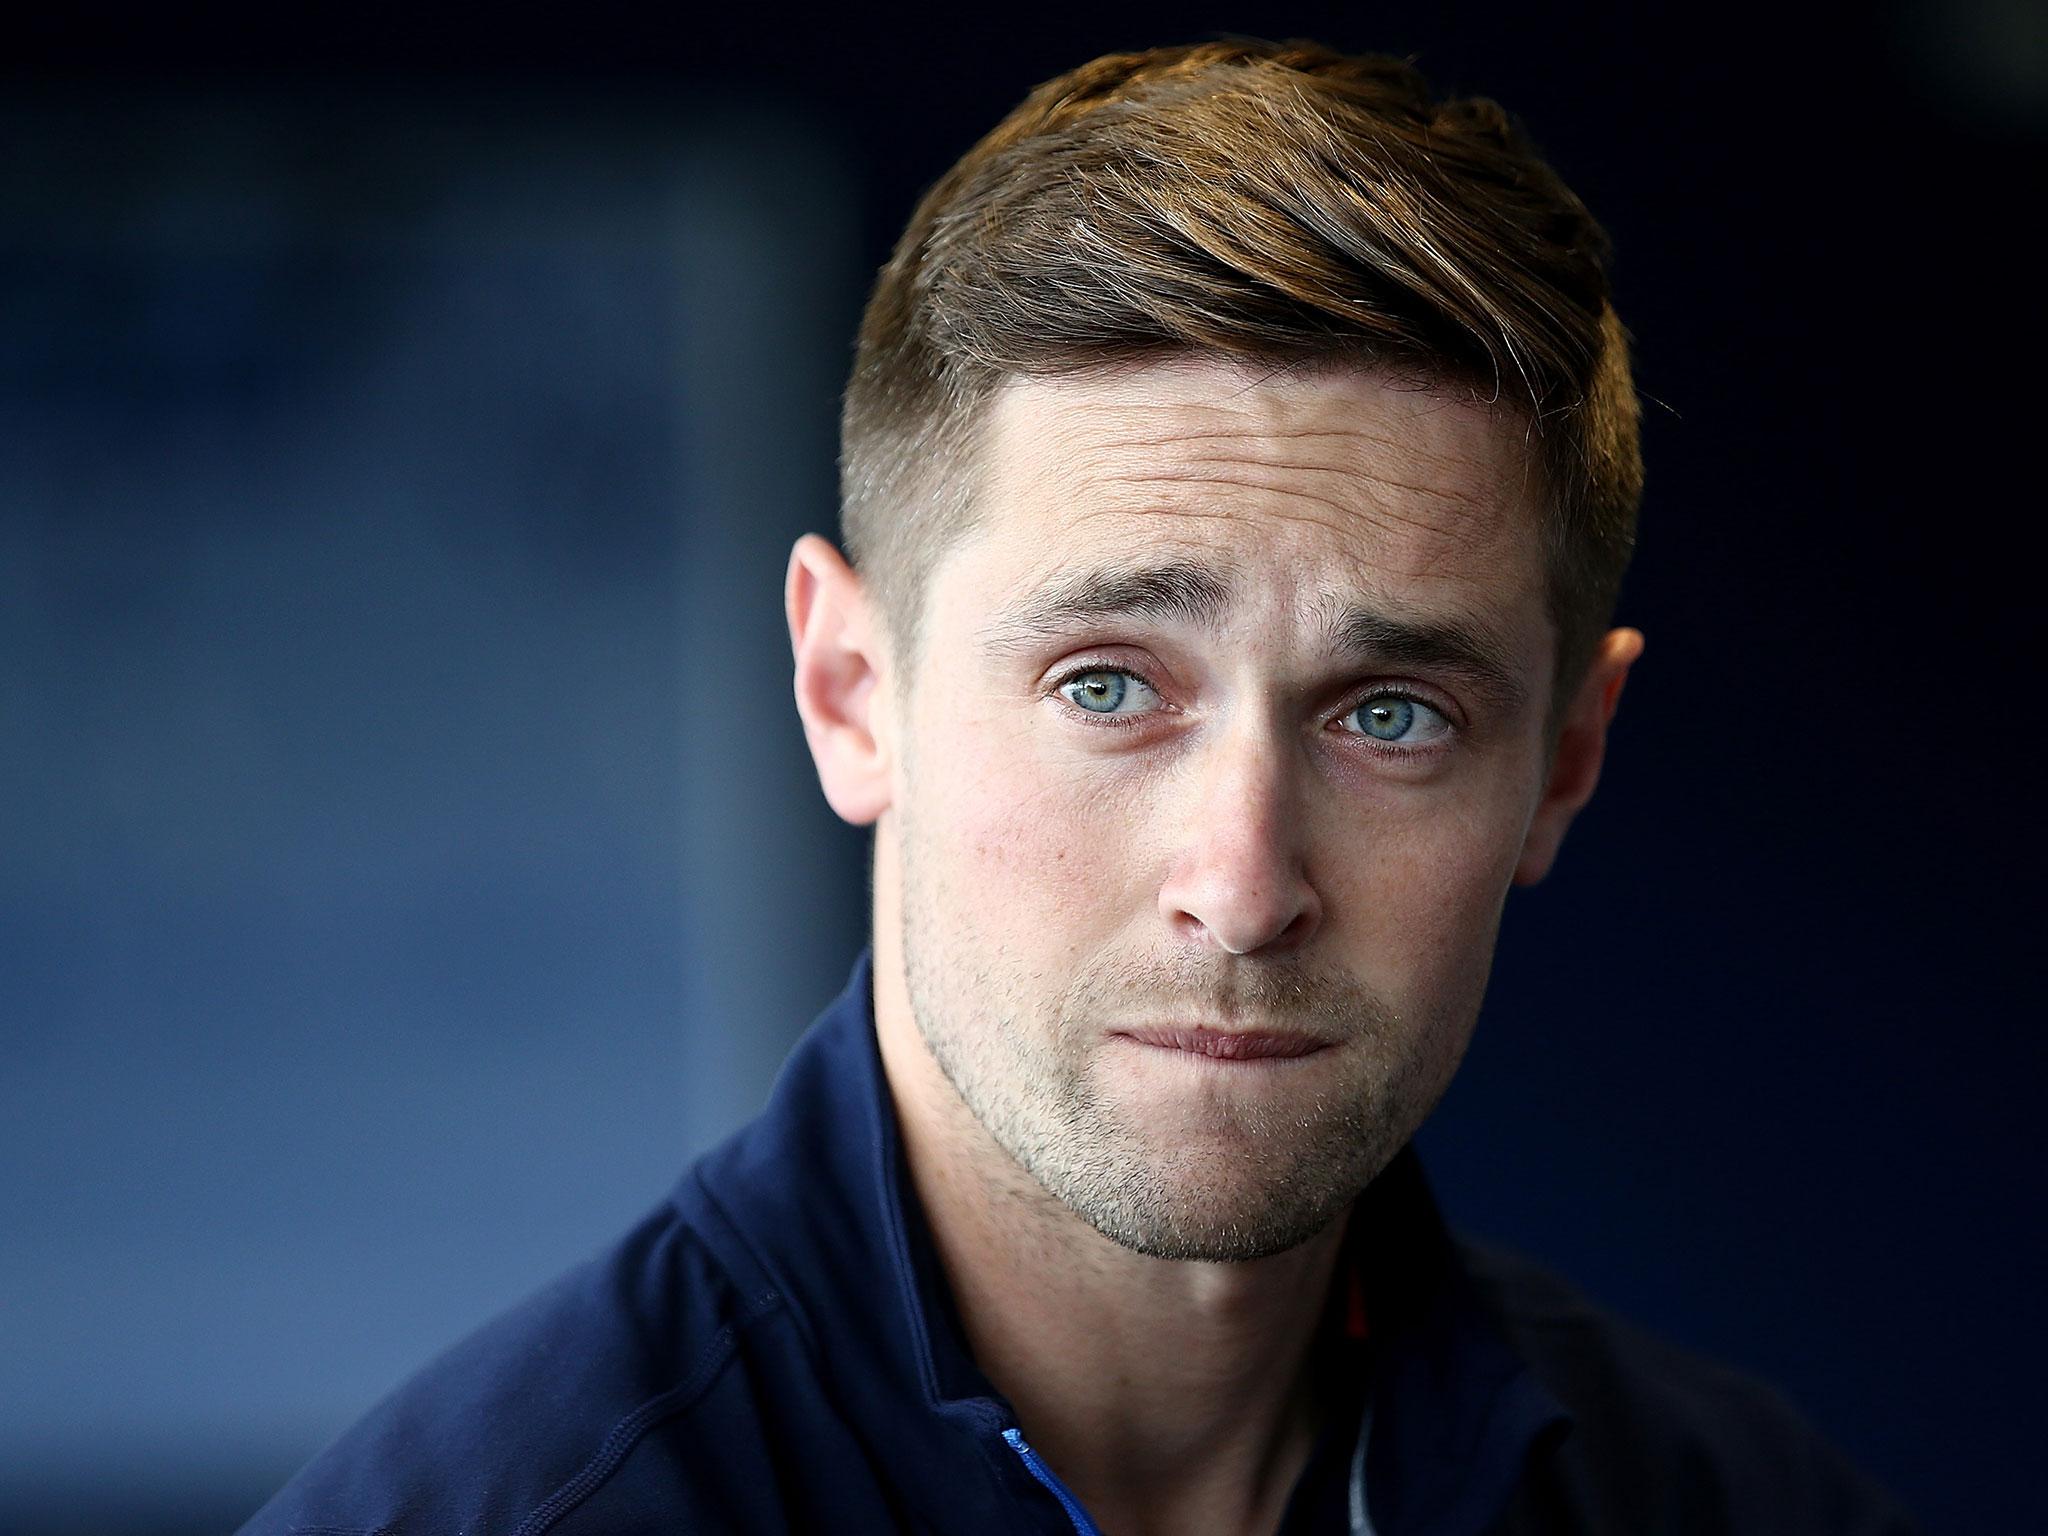 Root said Woakes has "been a consistent performer in Test cricket for England"